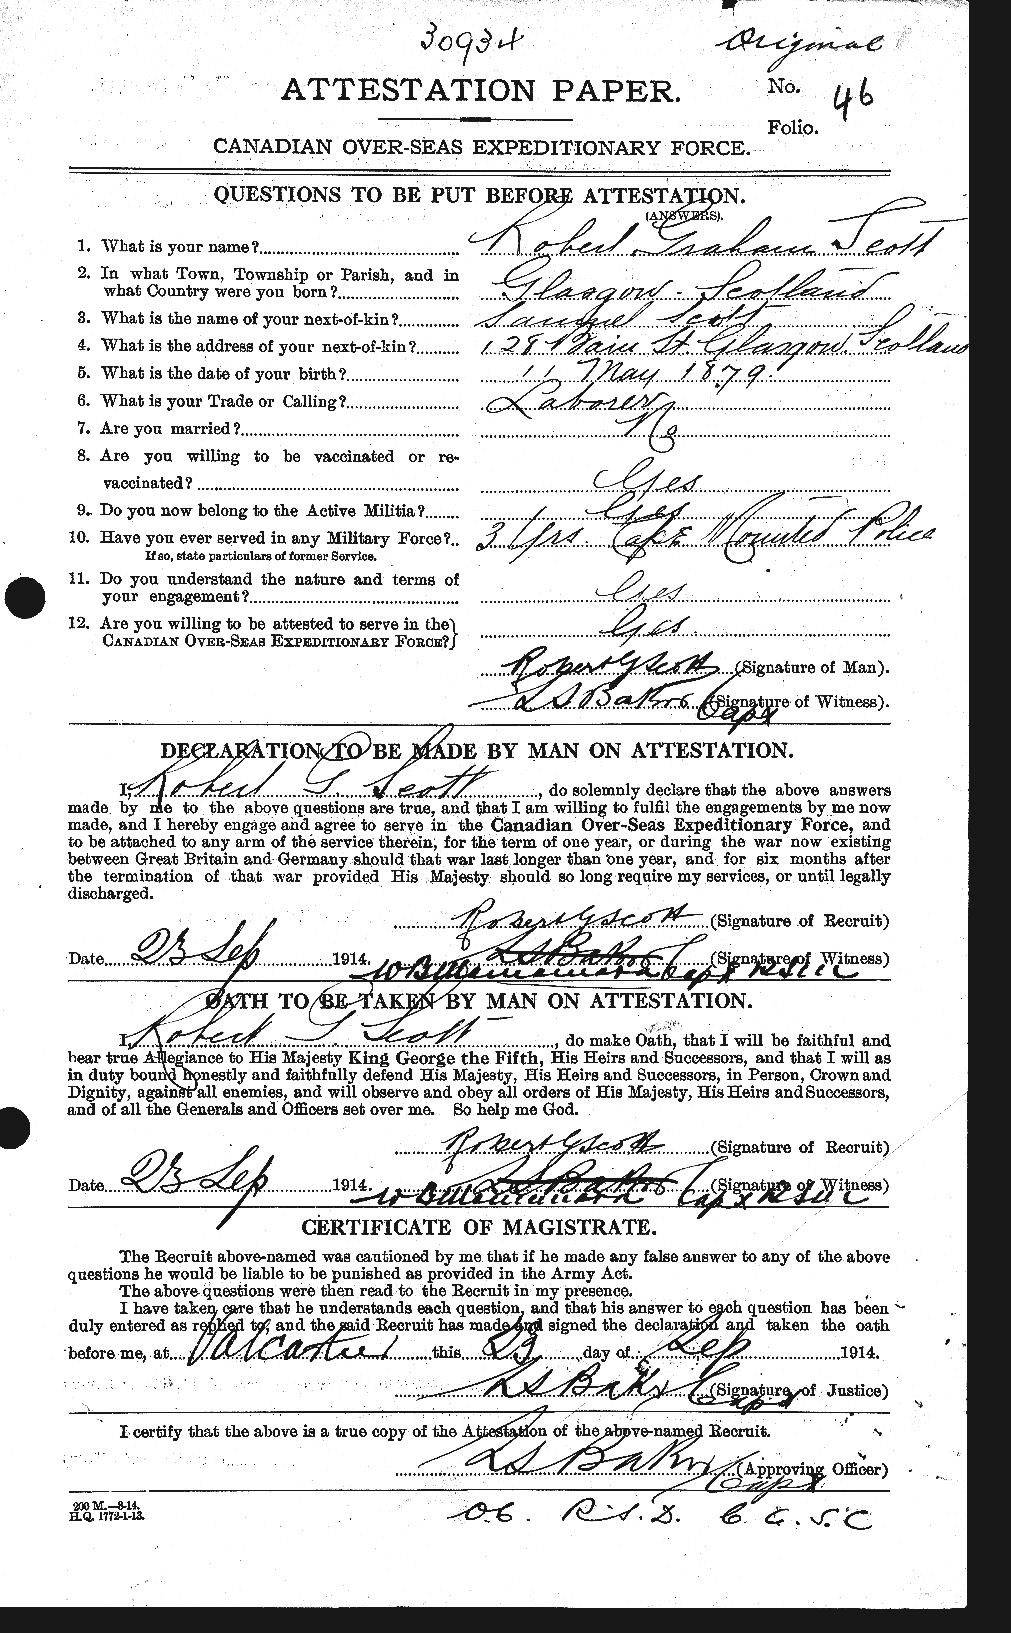 Personnel Records of the First World War - CEF 089139a